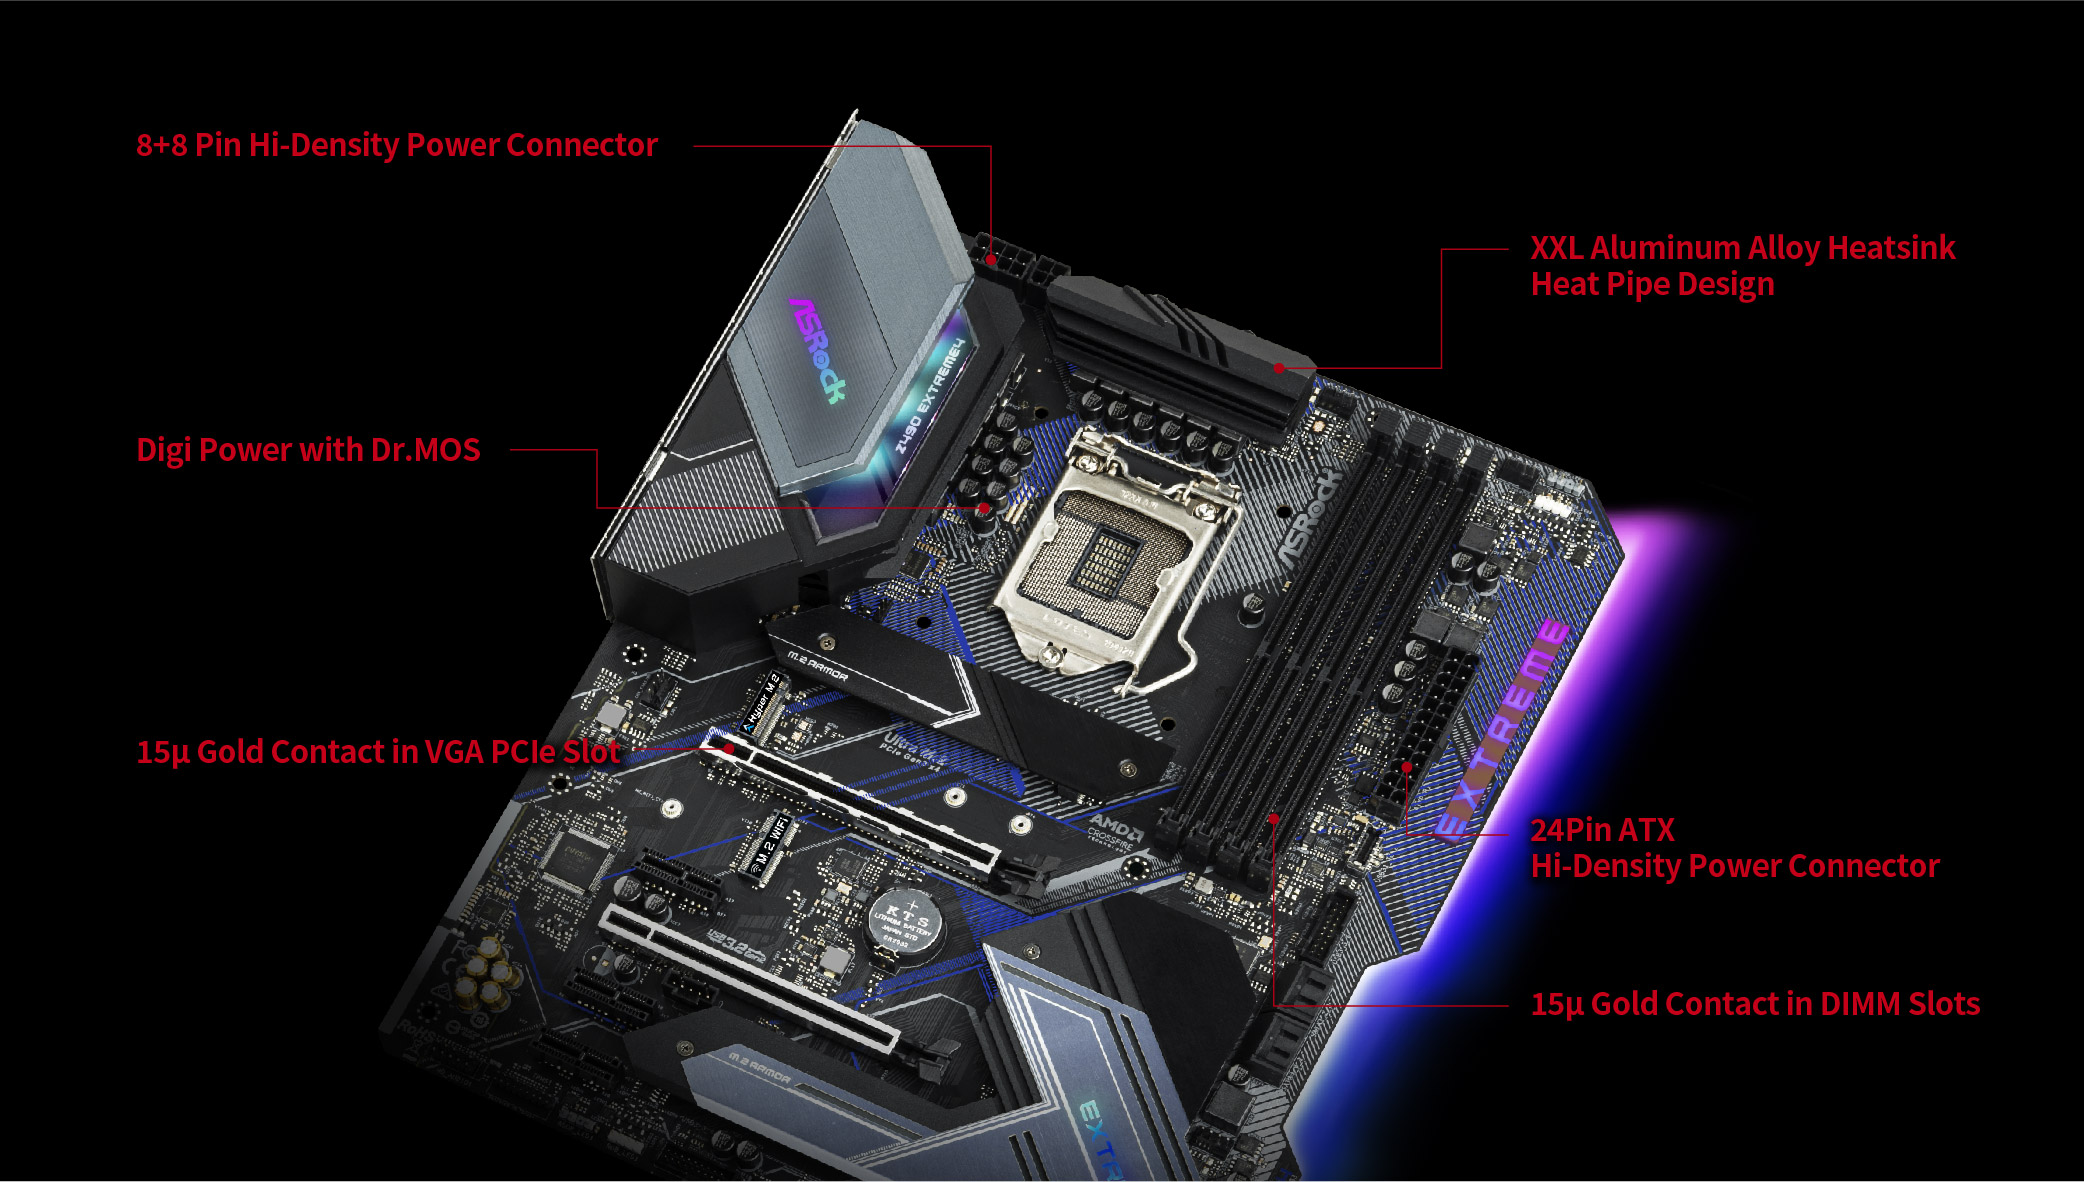 top side of the motherboard